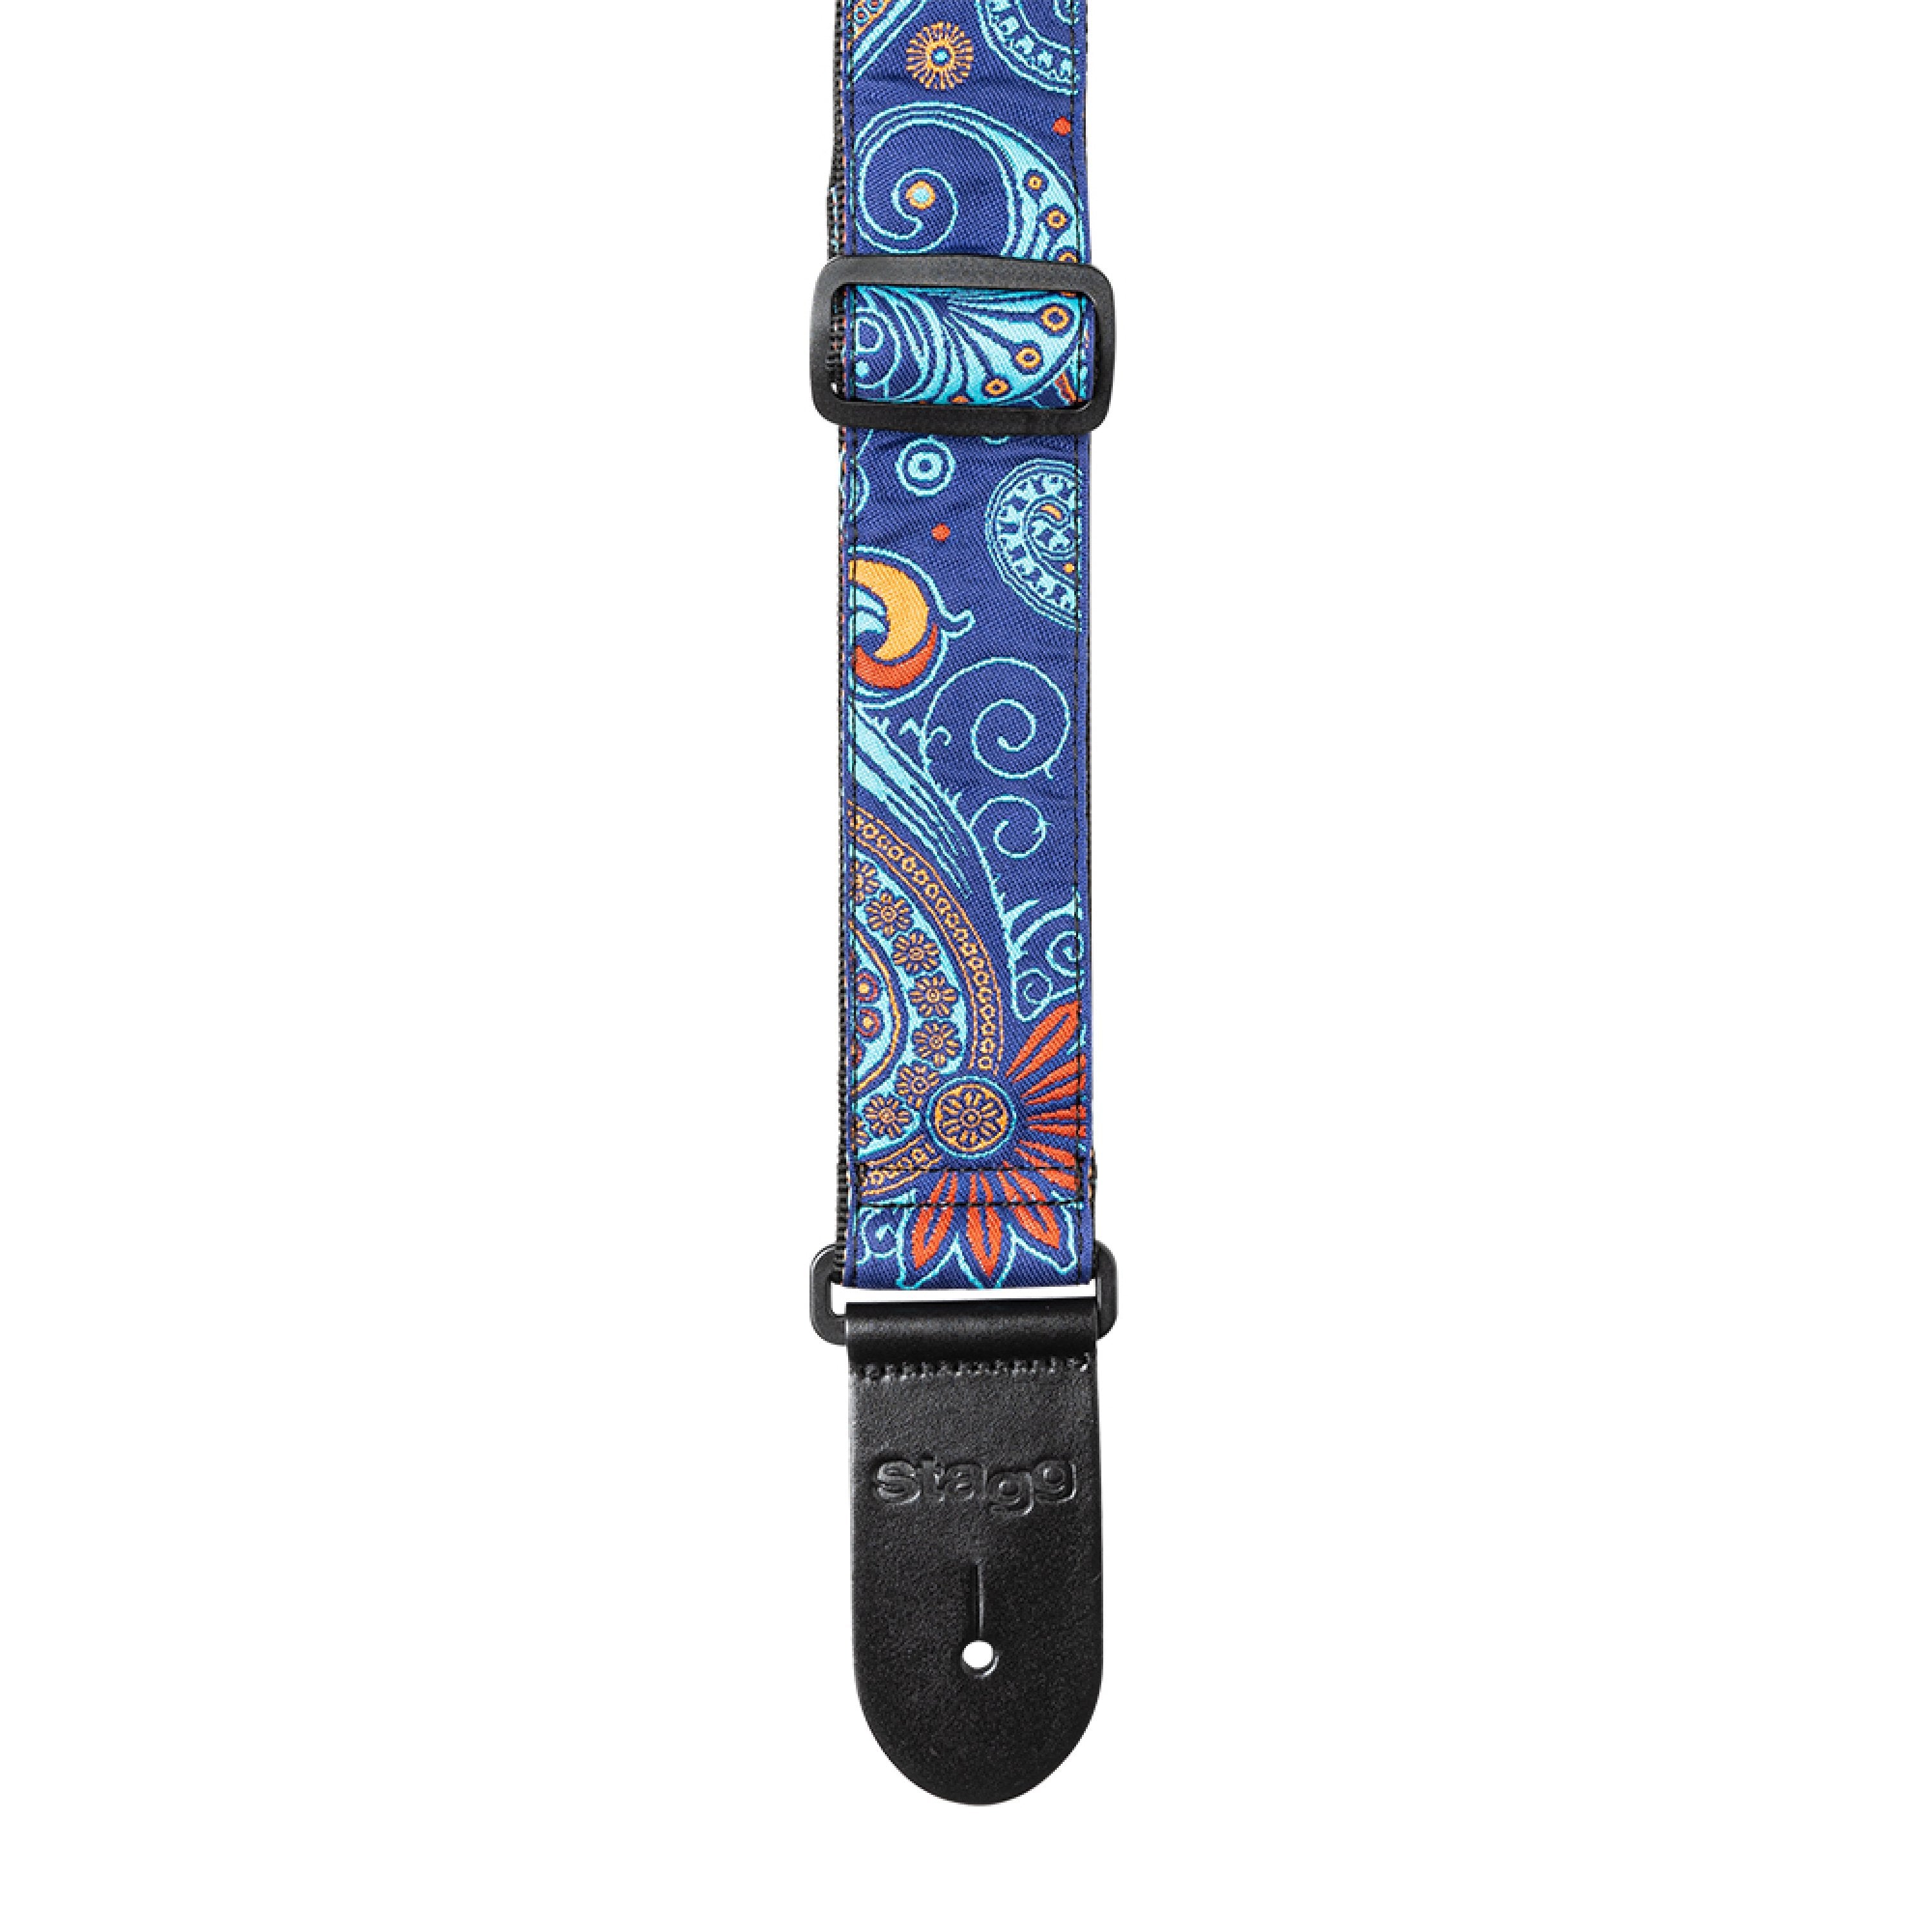 Stagg Woven Guitar Strap Paisley Pattern 2 Blue 2